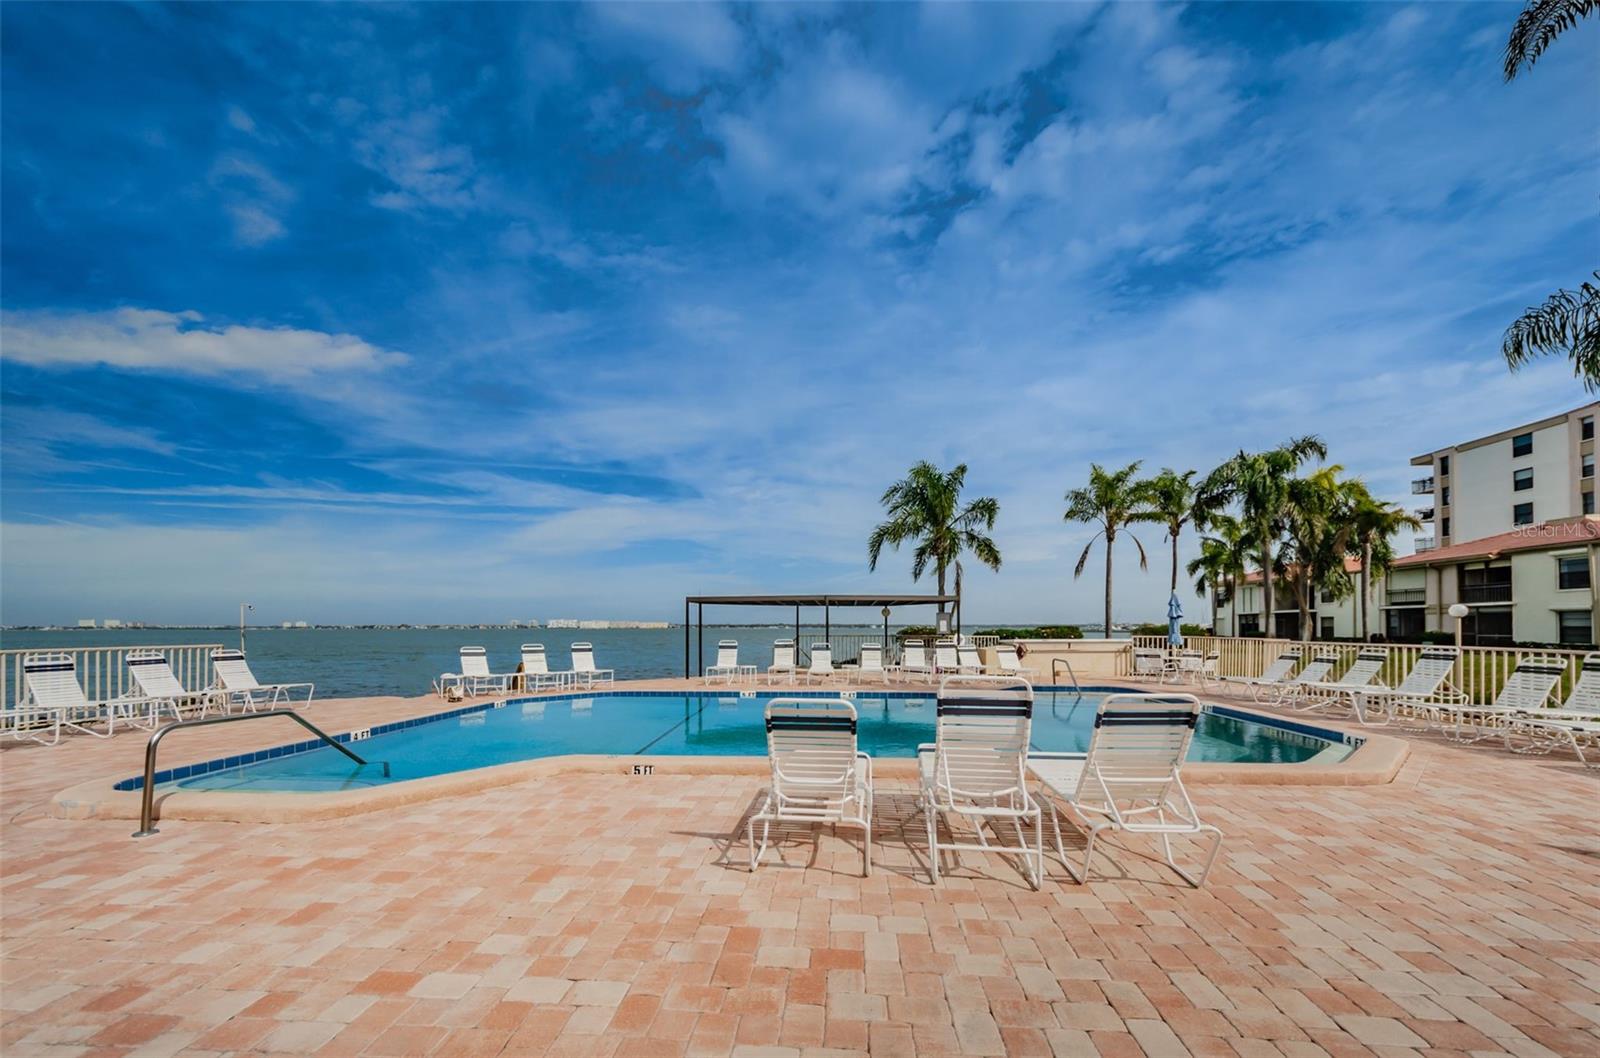 Heated Pool & Spa Overlooks Boca Ciega Bay - Perfect Place to Relax!